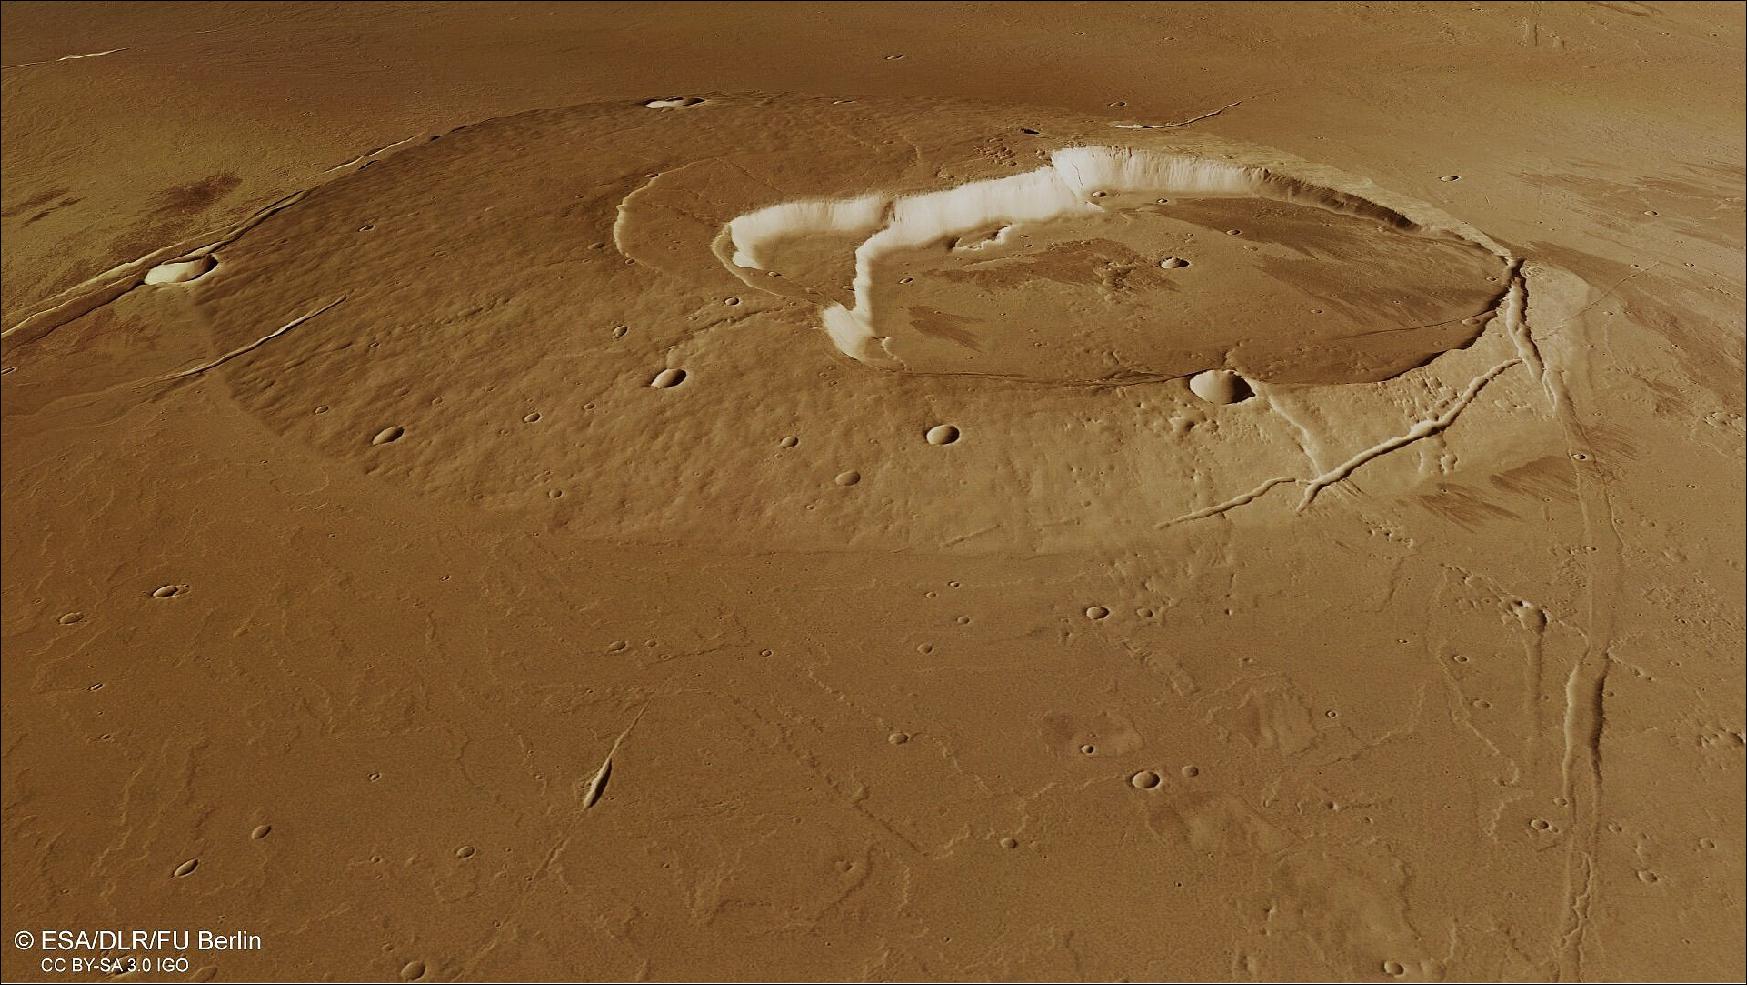 Figure 36: Second perspective view of Jovis Tholus. This oblique perspective view of the Jovis Tholus shield volcano on Mars was generated from the digital terrain model and the nadir and colour channels of the High Resolution Stereo Camera on ESA’s Mars Express. The volcano’s complex caldera system comprises at least five craters. The largest is about 28 km wide, and sits off centre. The calderas step down towards the southwest where the youngest eventually meets with the surrounding sea of even younger lava flows (image credit: ESA/DLR/FU Berlin, CC BY-SA 3.0 IGO)